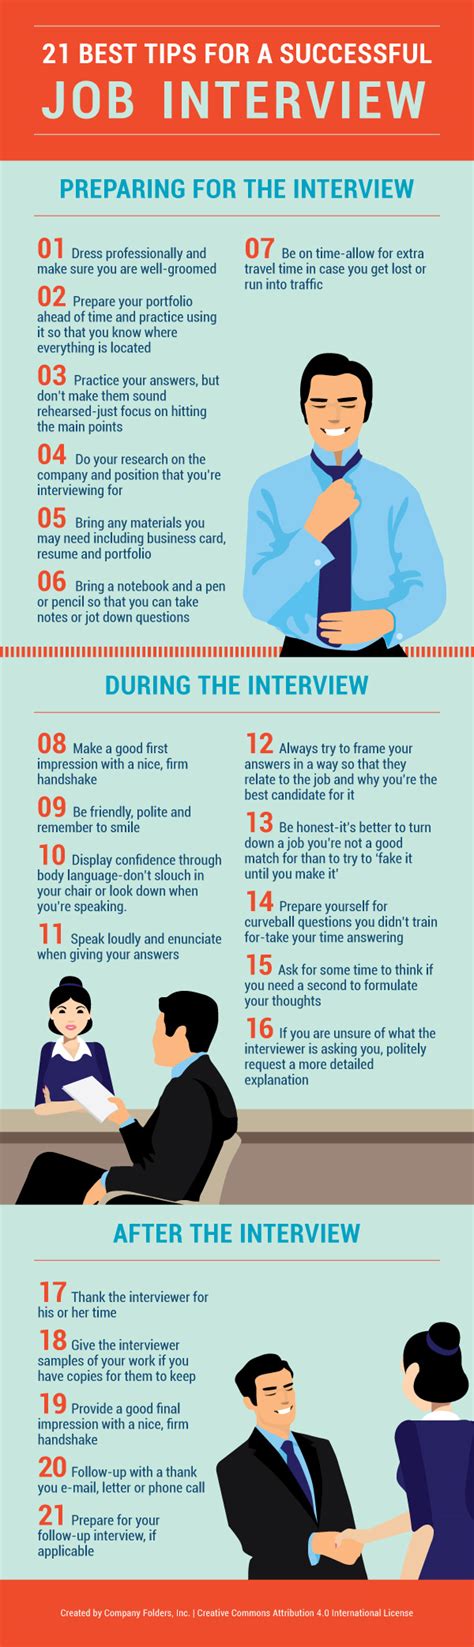 21 Best Tips For A Successful Job Interview Infographic Executive Drafts